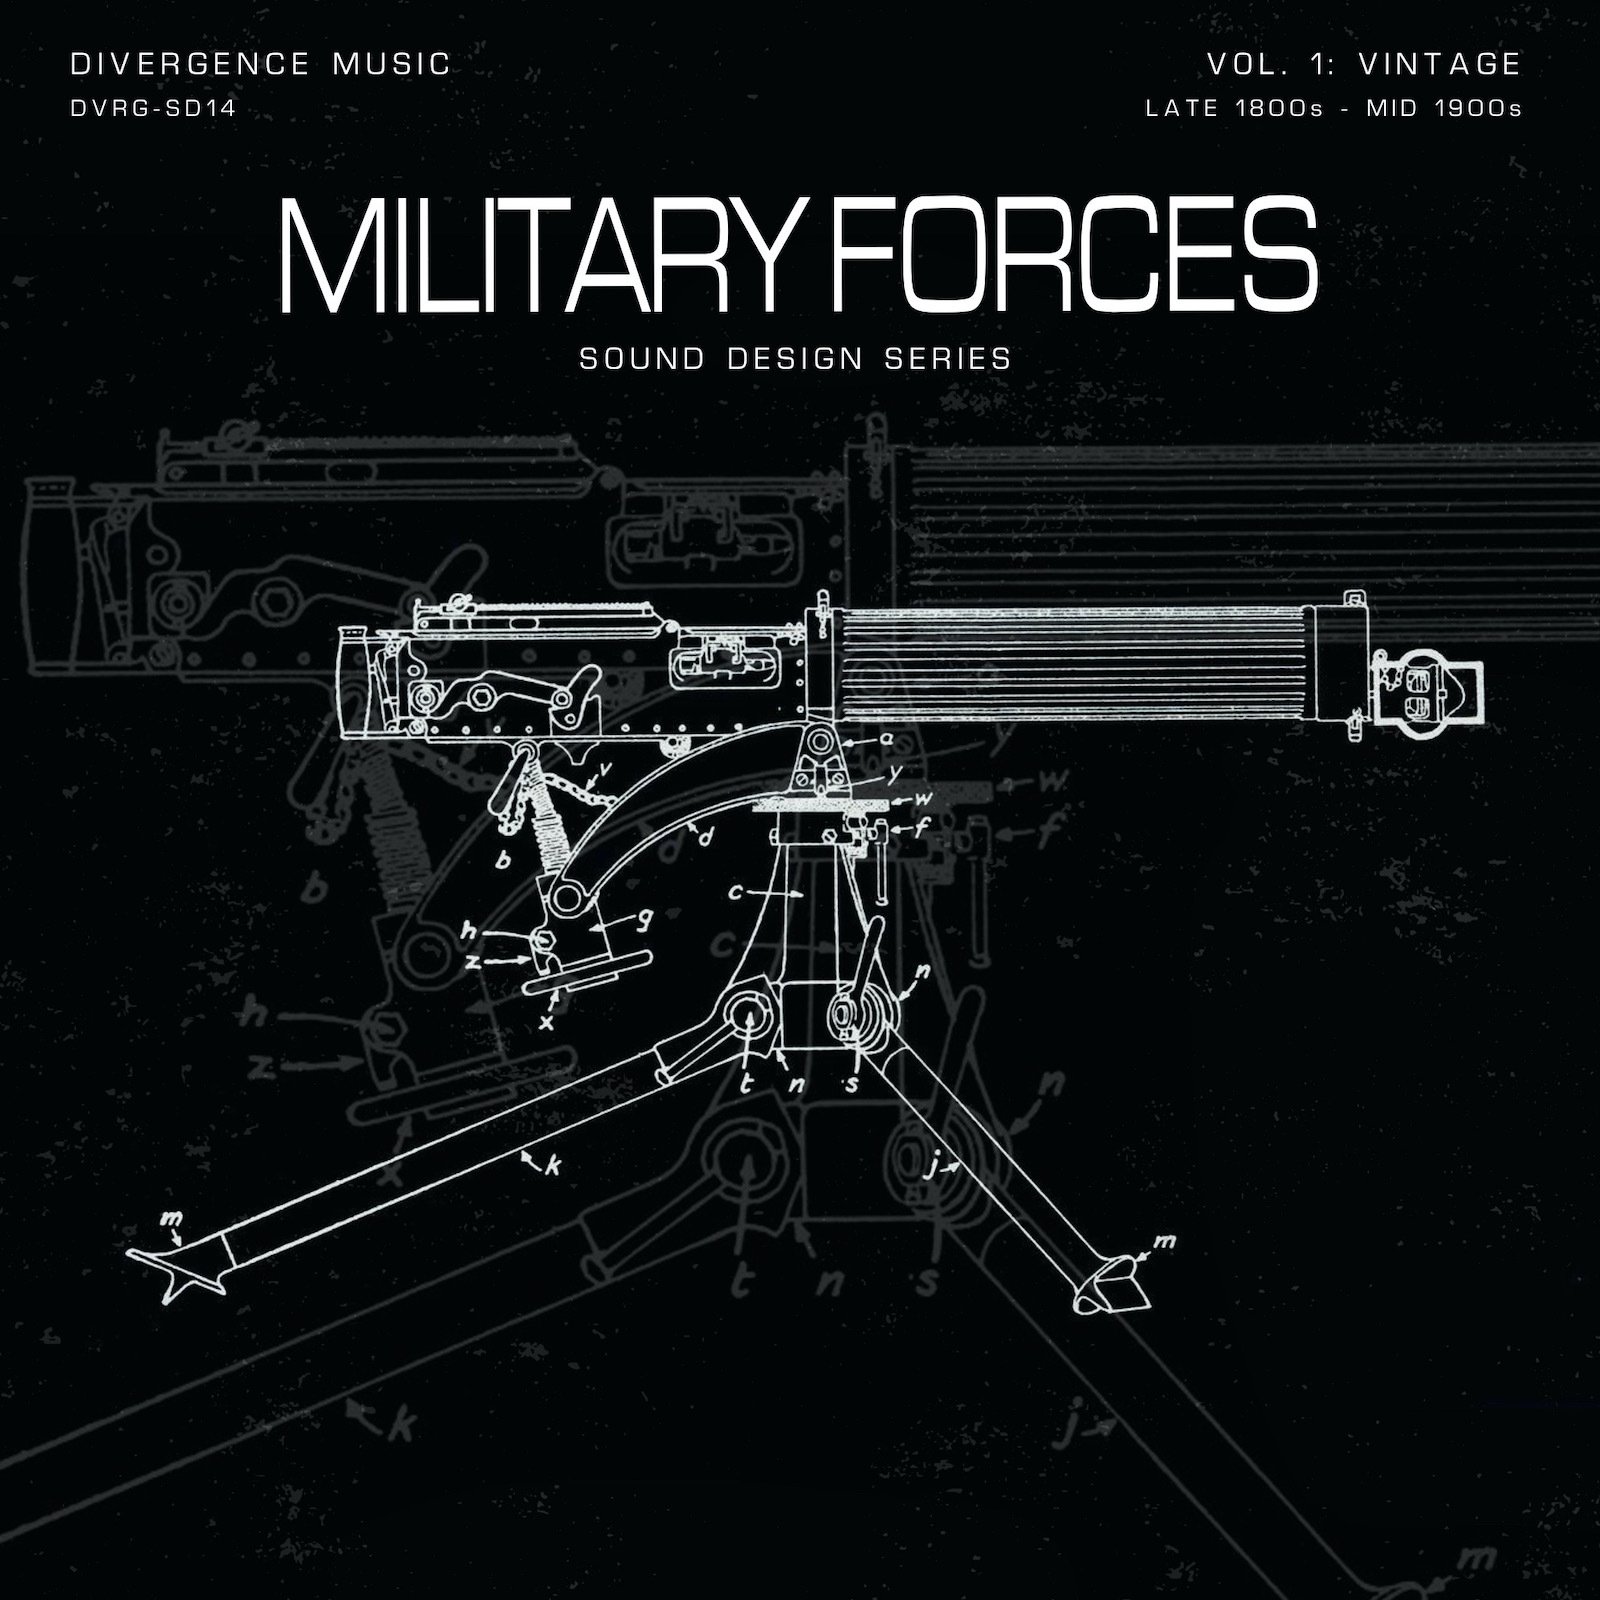 DVRG-SD14 Military Forces_ vol1 Vintage - Pre WWI to WWII (sound design)_cover.jpg